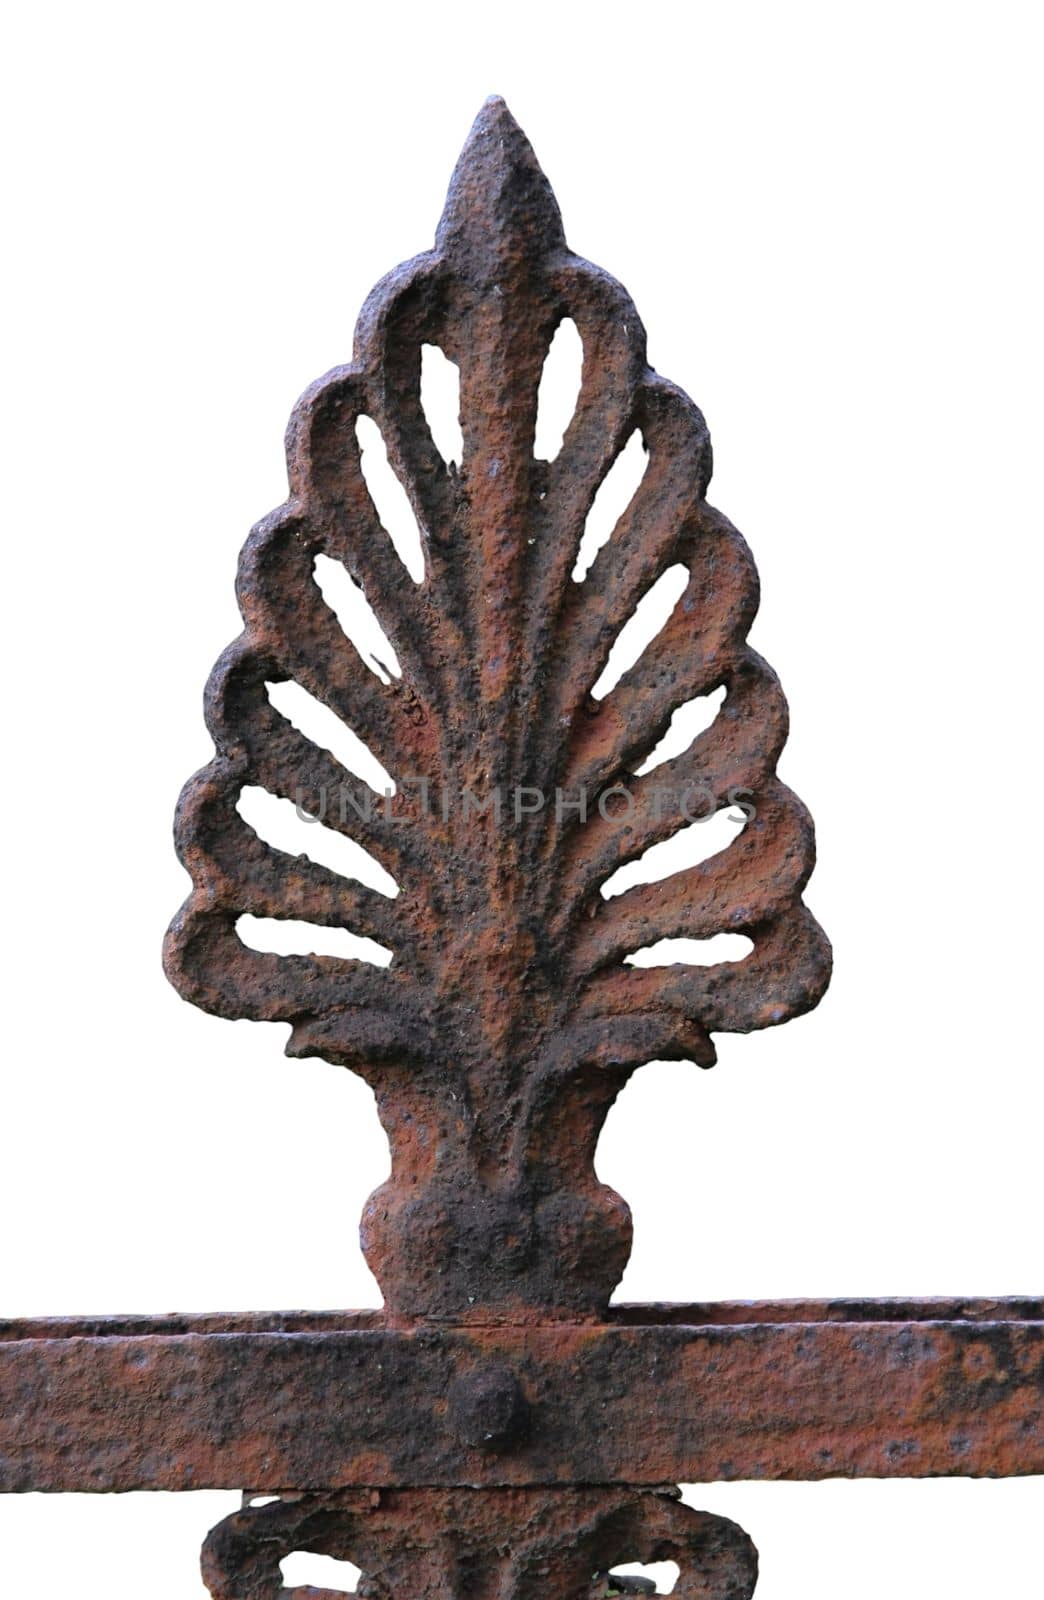 Old brown rusty weathered fence ornament close up. by gallofoto